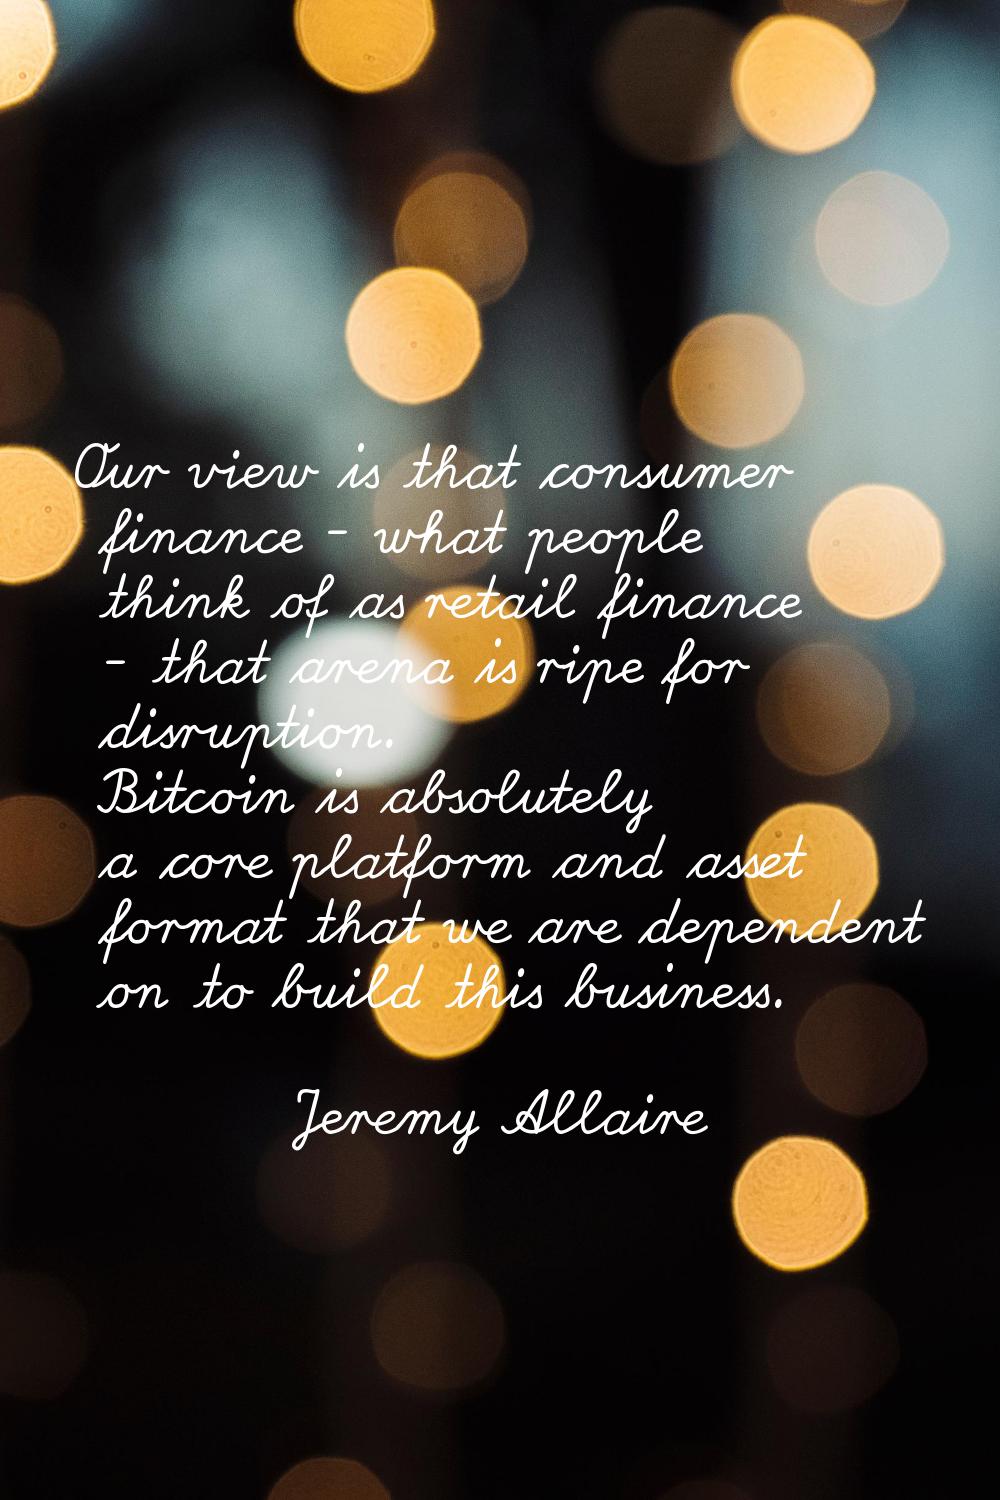 Our view is that consumer finance - what people think of as retail finance - that arena is ripe for